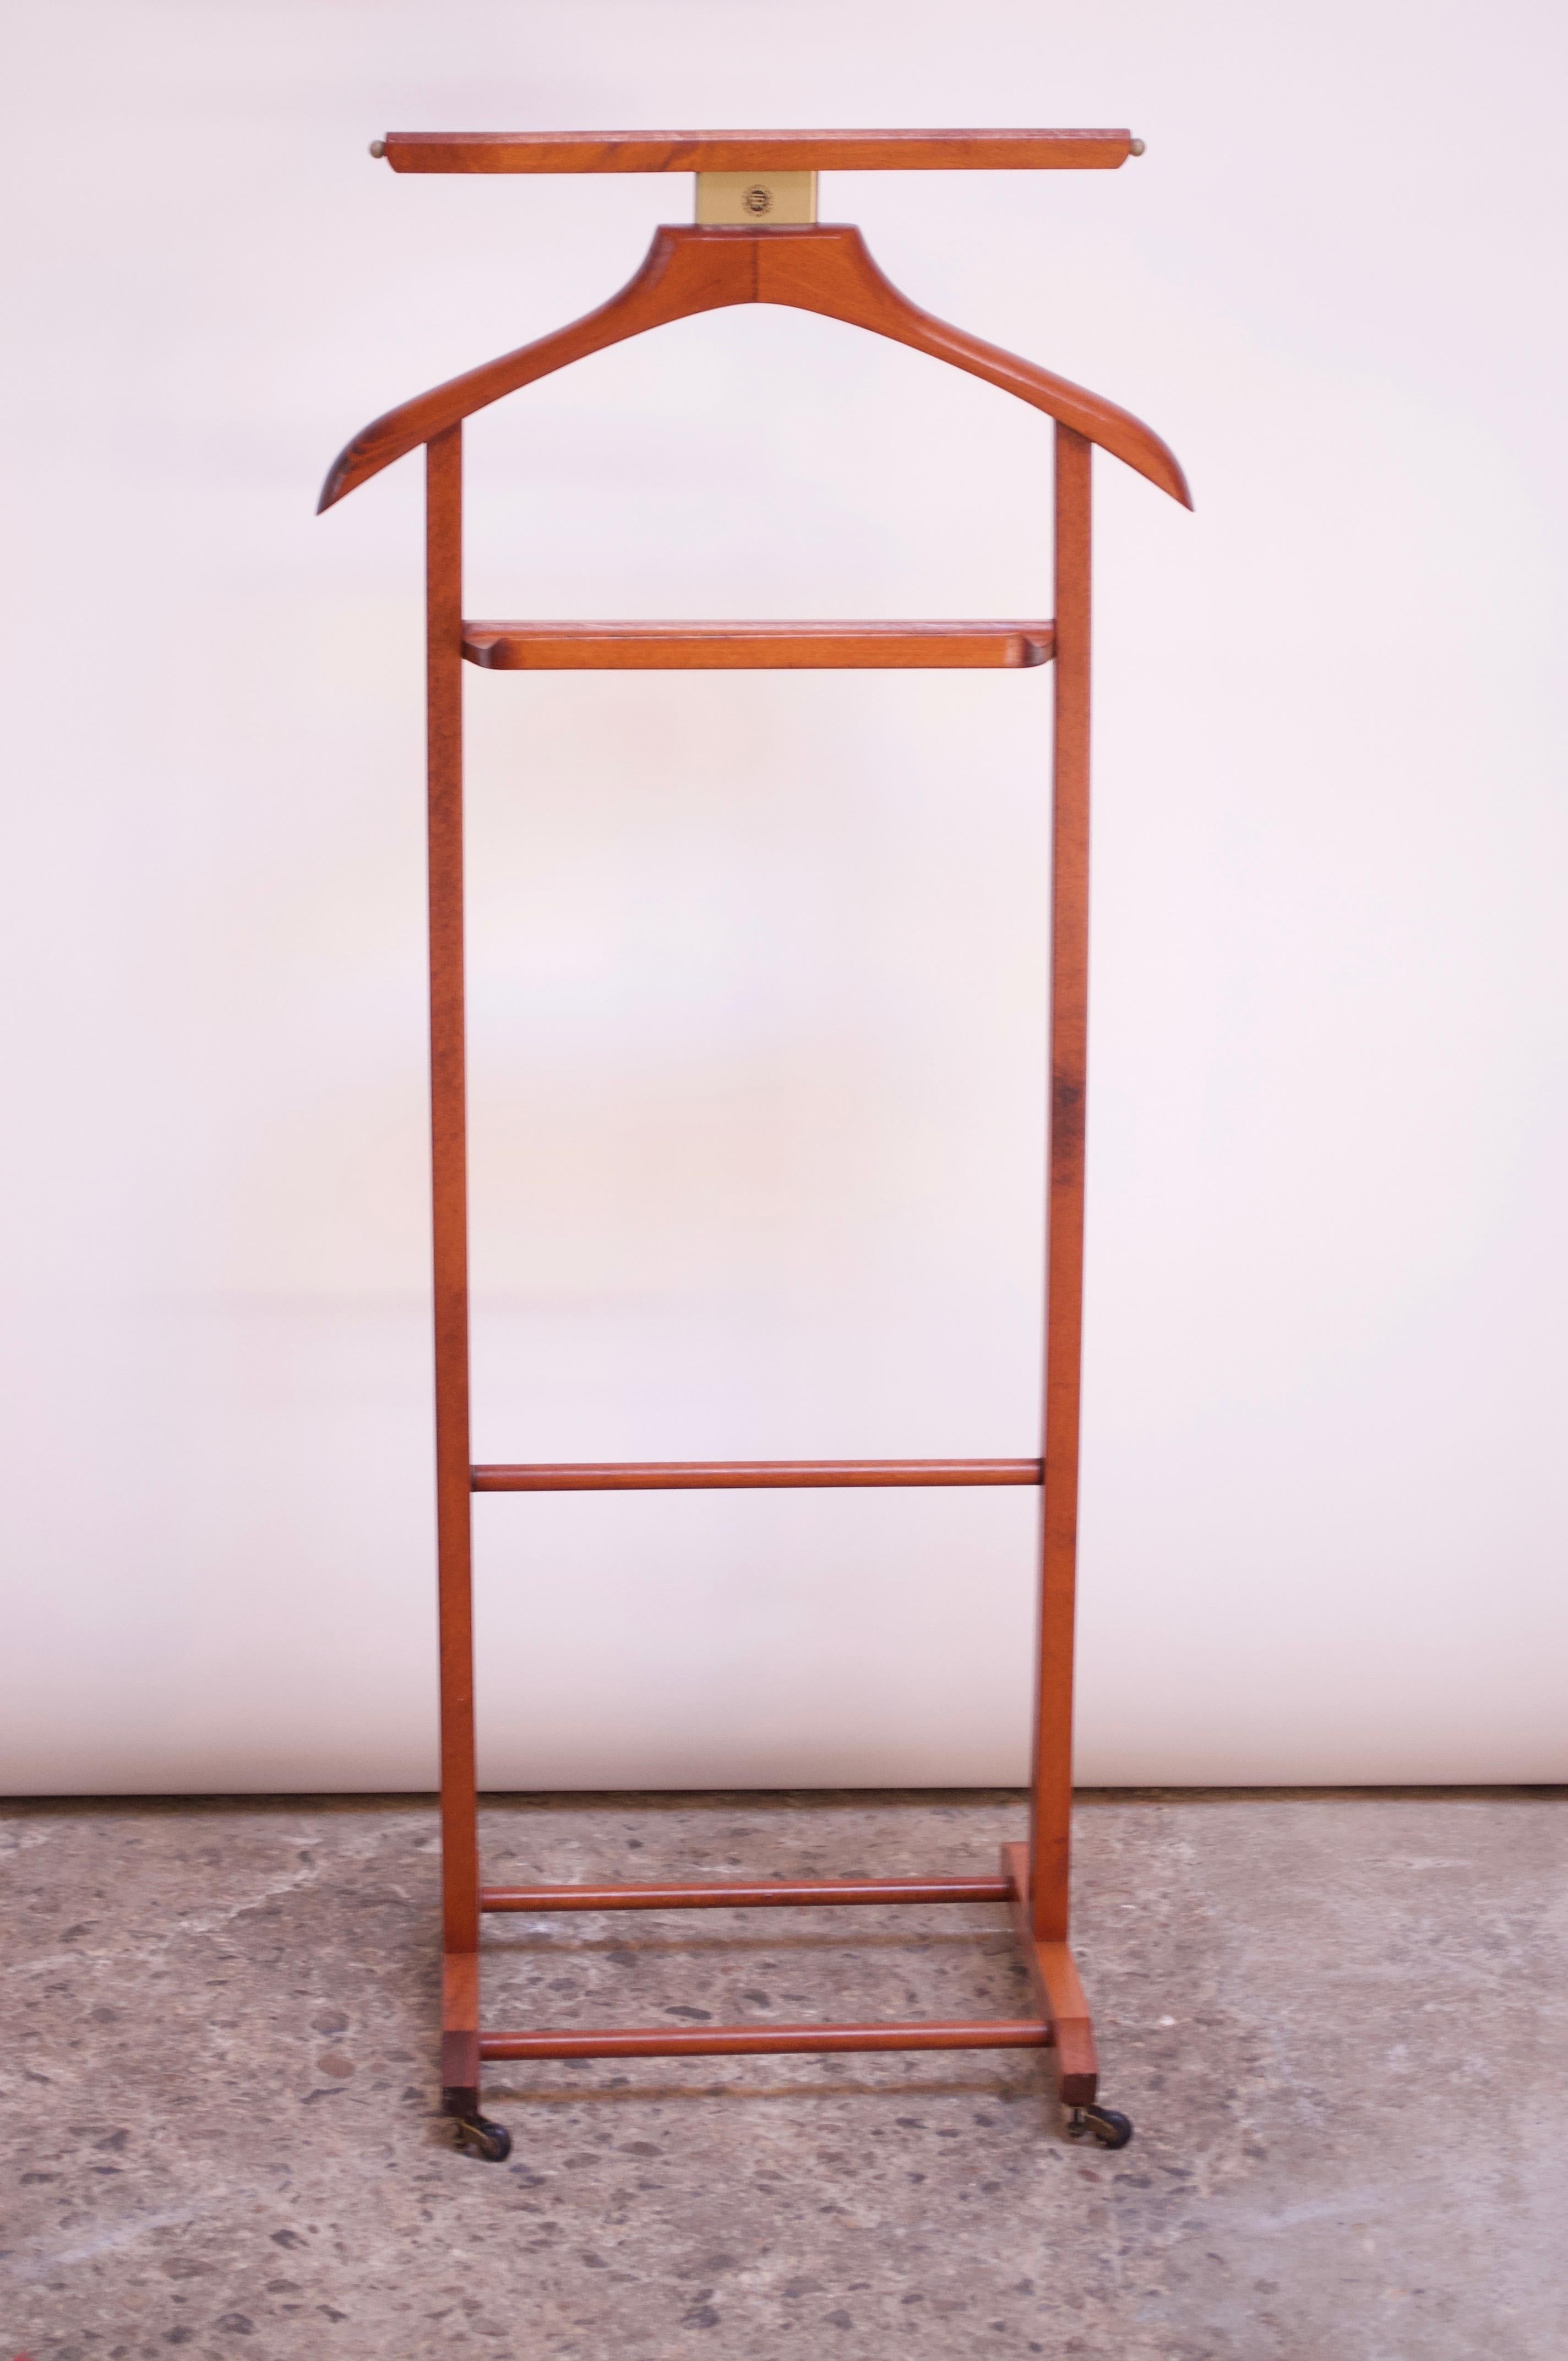 This Italian valet was designed by Fratelli Reguitti in the 1950s. Composed of a frame/hanger and change or cufflink holder with a double rack on the bottom for shoes and four caster wheels for easy mobility. The top bar (intended for hanging